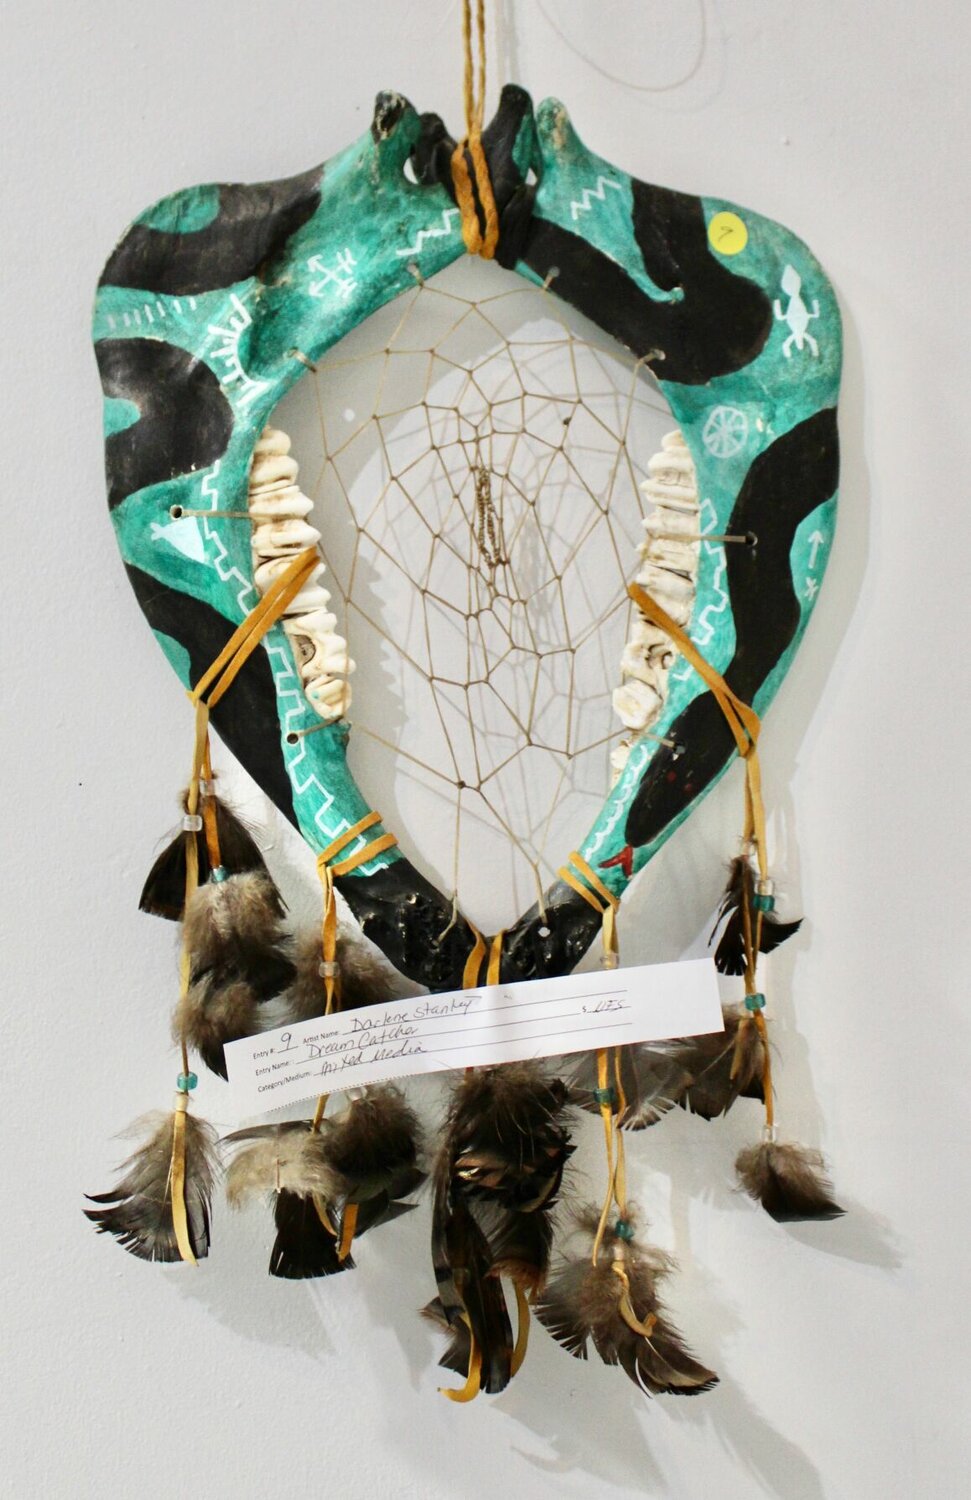 A mixed media dreamcatcher entered by Darlene Stanley is one of the more unique techniques on display at the Harlin Museum Fiber Arts Show. The exhibit may be viewed from noon to 4 p.m. Thurdays through Sunday, through Feb. 18, at the museum, 405 Worcester St.